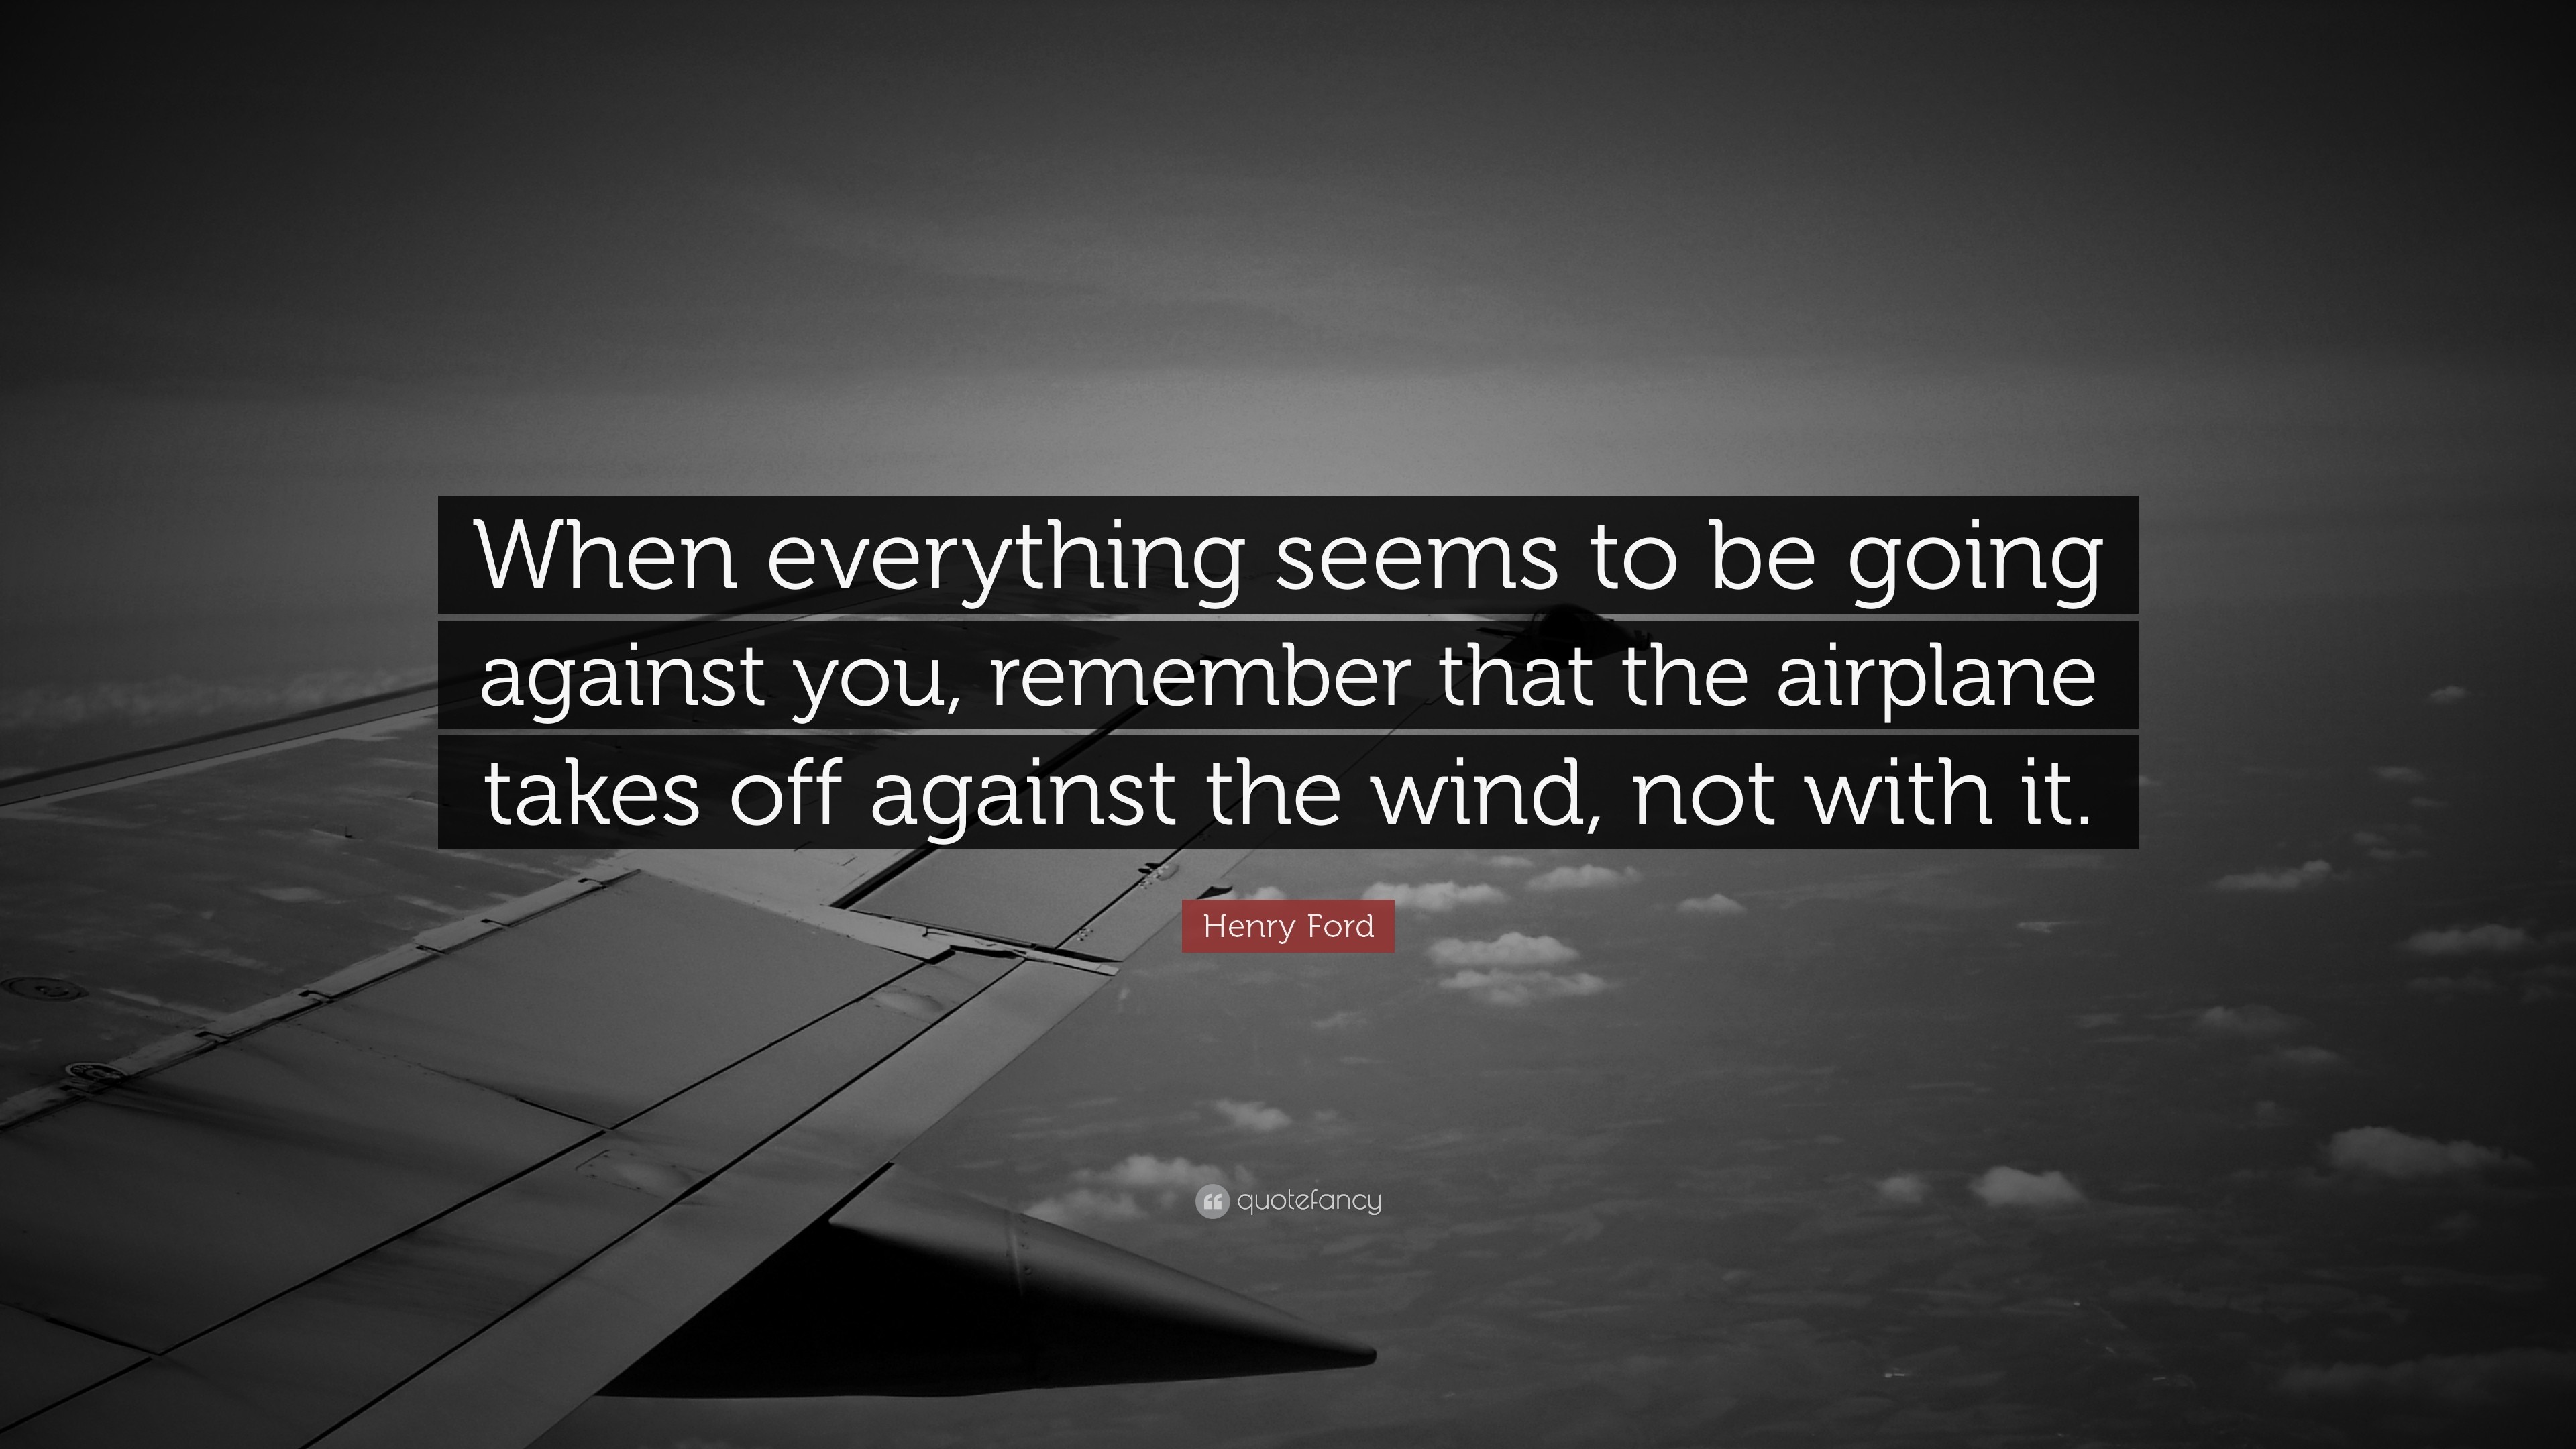 3840x2160 Attitude Quotes: “When everything seems to be going against you, remember  that the